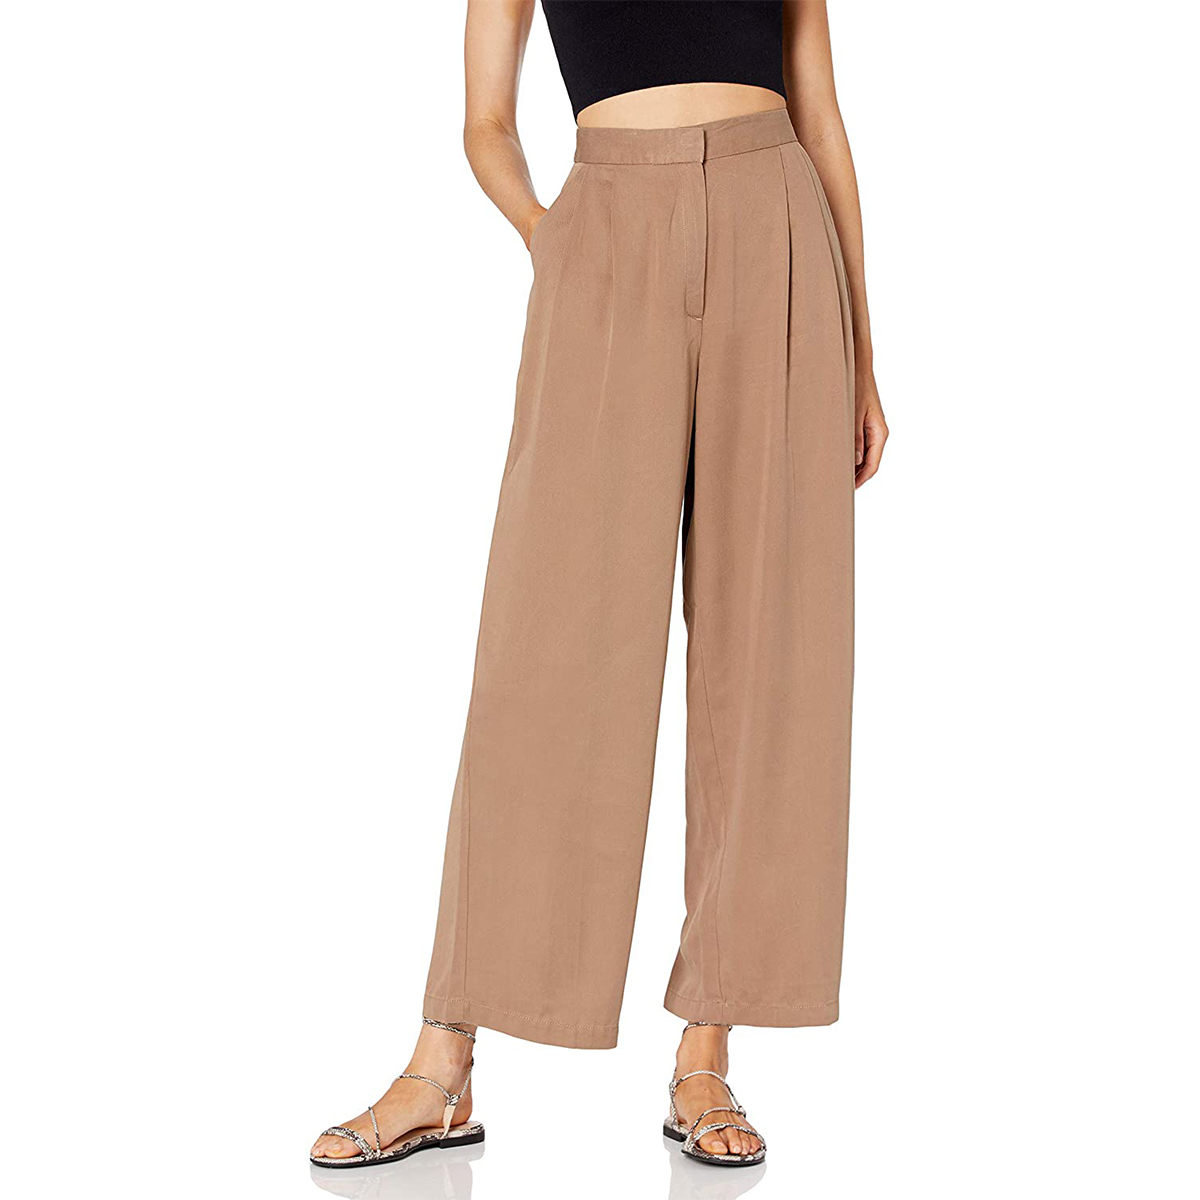 The Best Pants on Amazon That Are Comfortable and Chic | Who What Wear